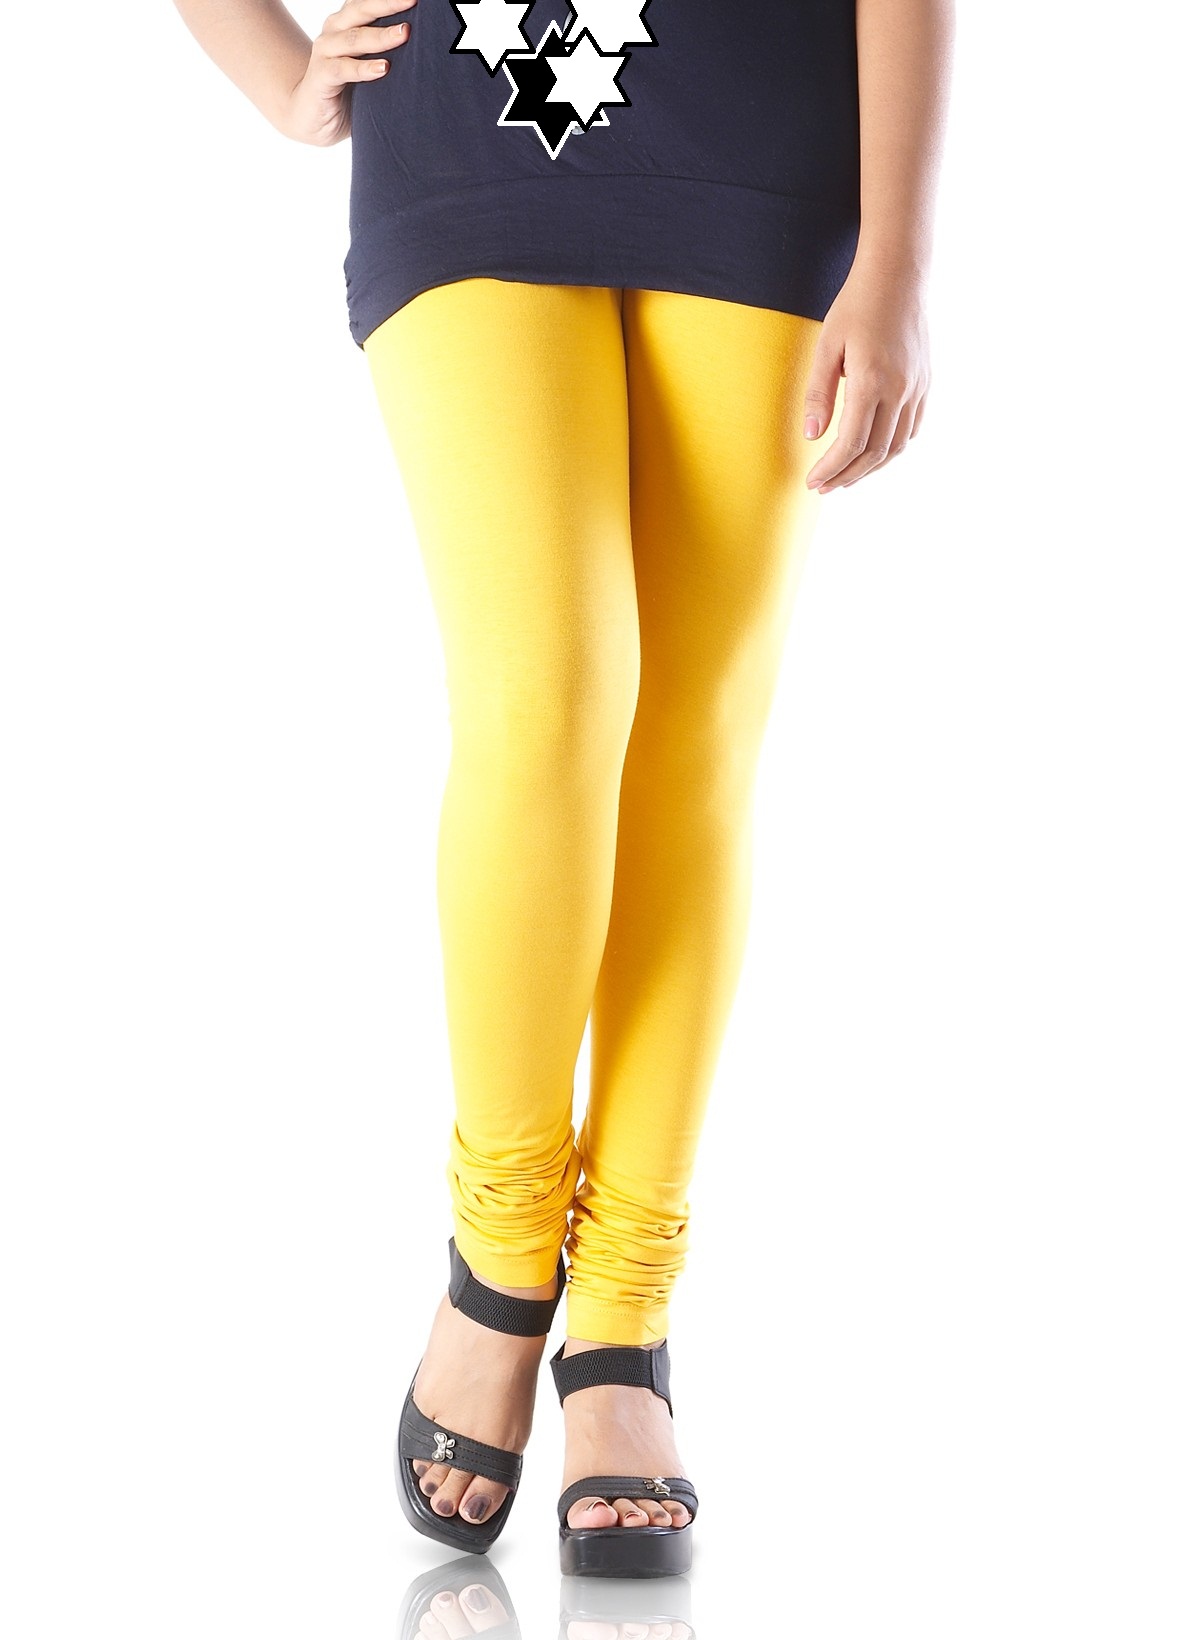 Cotton Leggings Sexy Skin Fit Slacks Yellow Color Footless